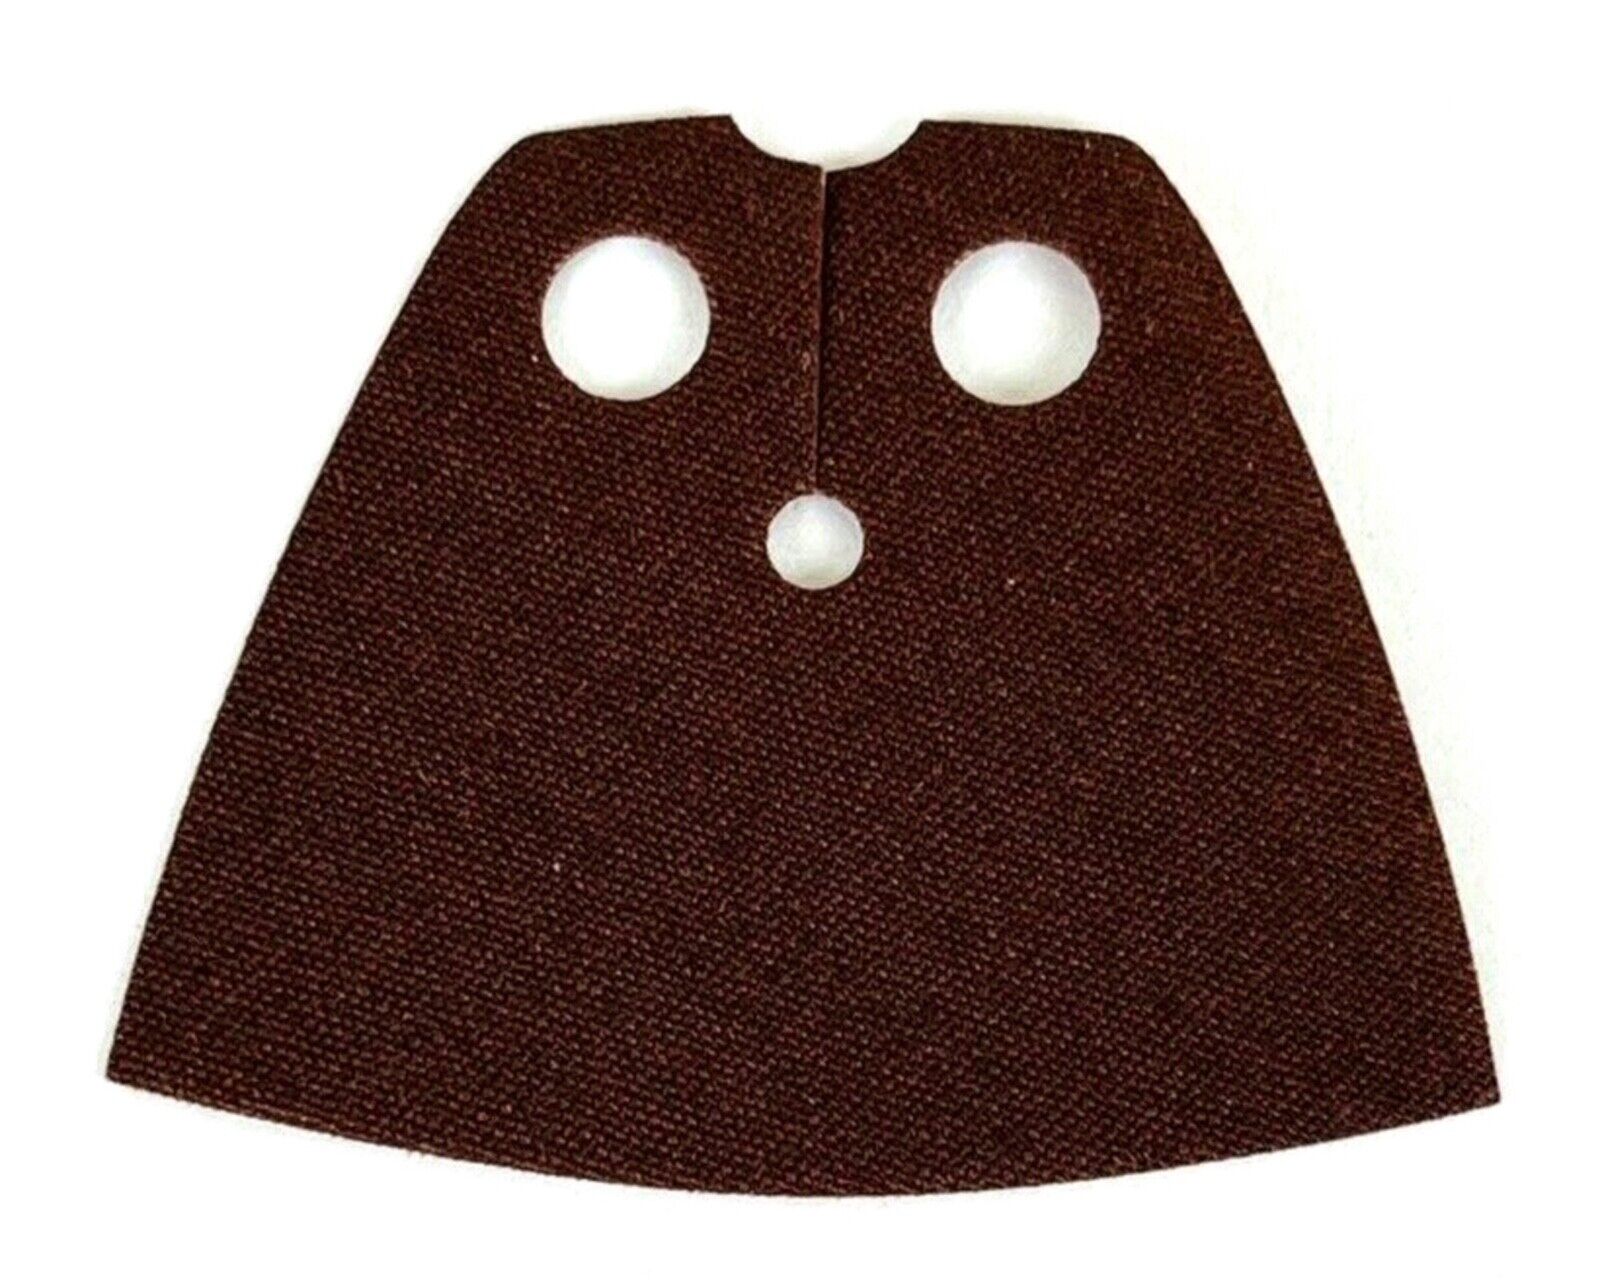 Lego NEW Reddish Brown Minifigure CAPE ONLY for lor041/lor052/lor123 99464 (A20)